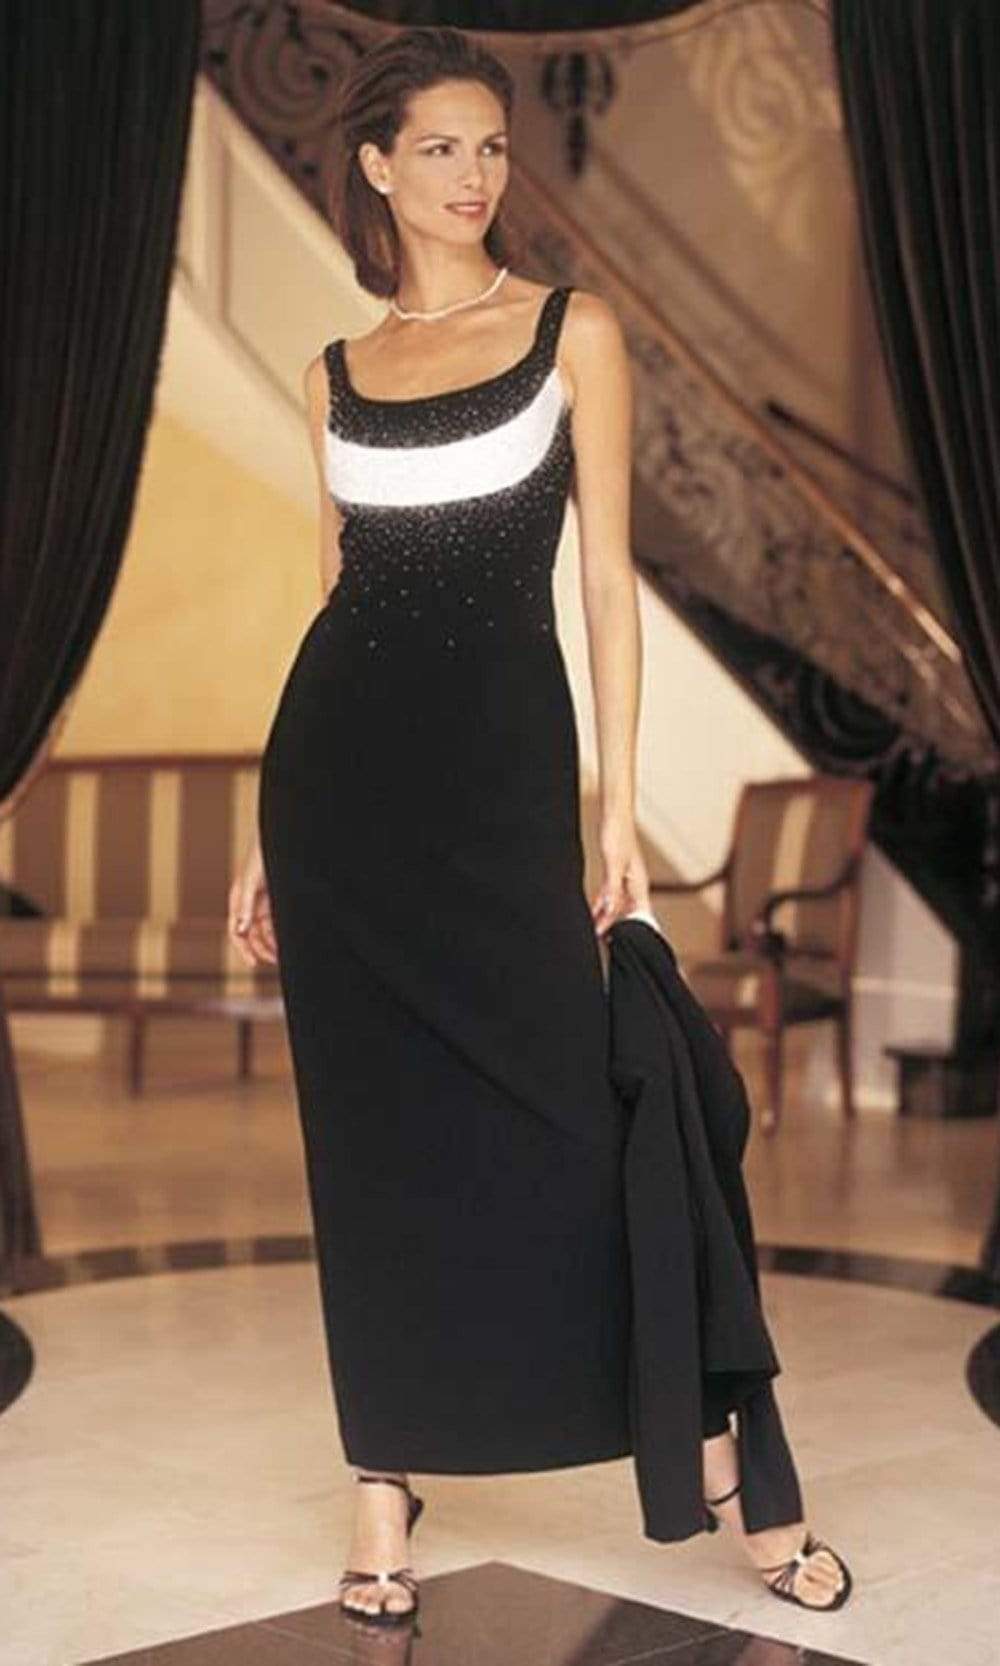 Alexander by Daymor 6121 Beaded Scoop Neck Column Evening Dress  - 1 pc Cameo Rose In Size 4 Available CCSALE